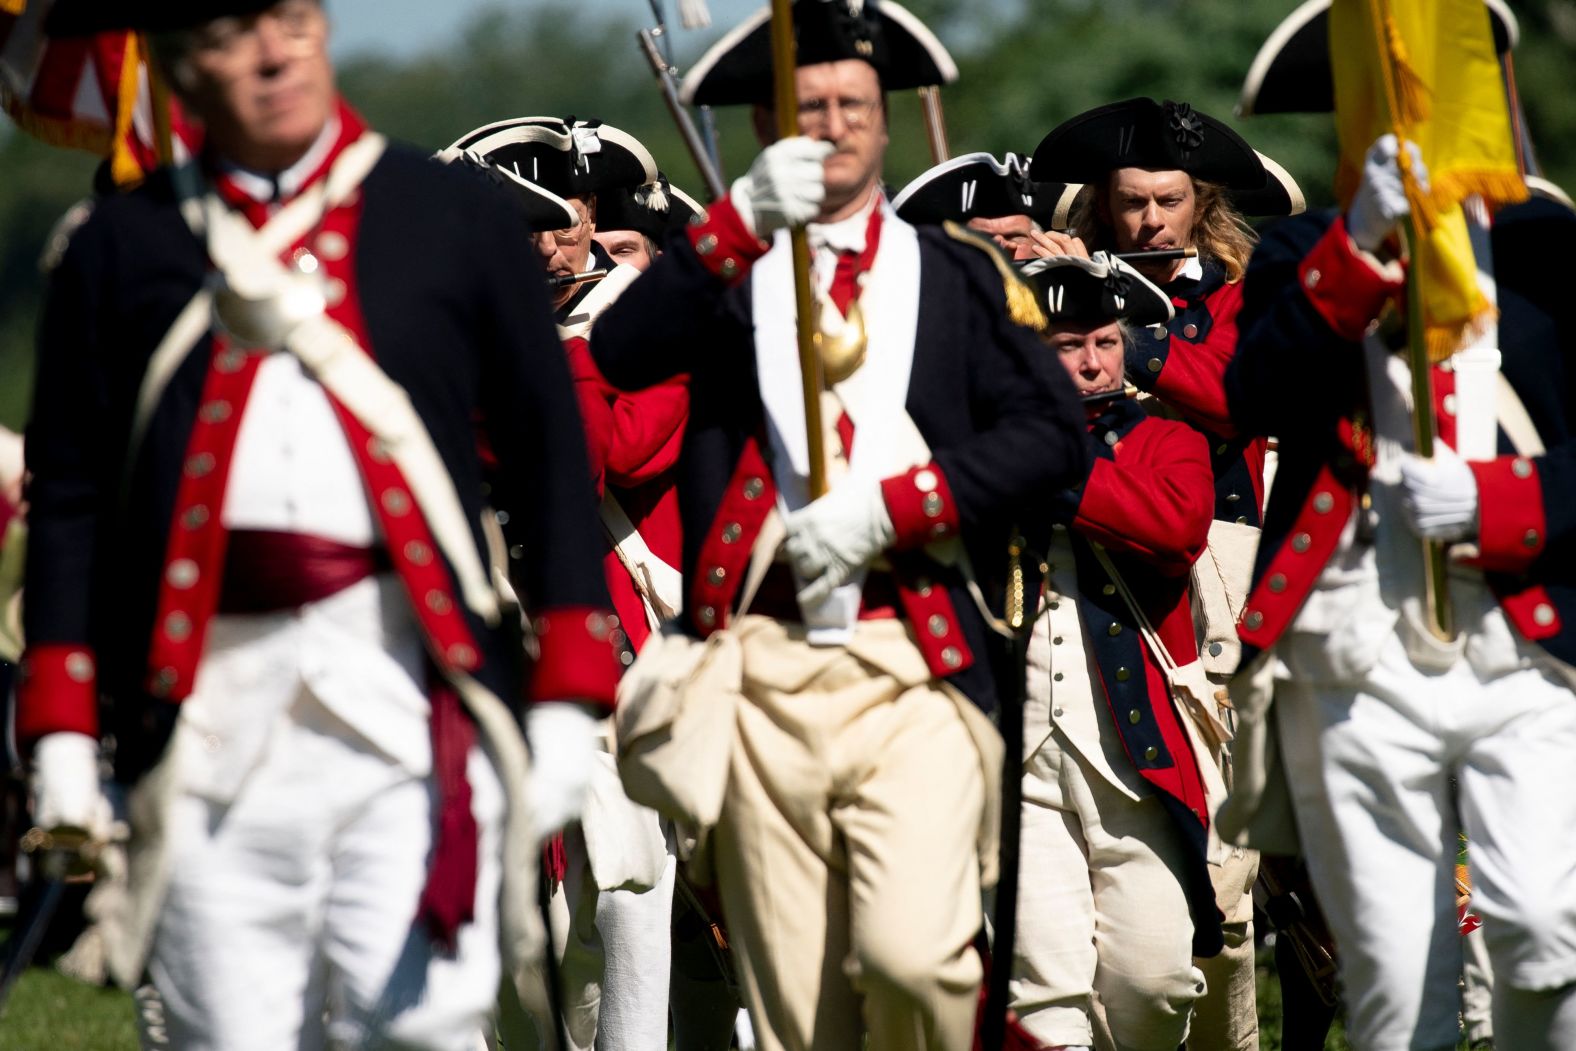 War re-enactors participate in Independence Day celebrations at George Washington's residence in Mount Vernon, Virginia, on Monday.